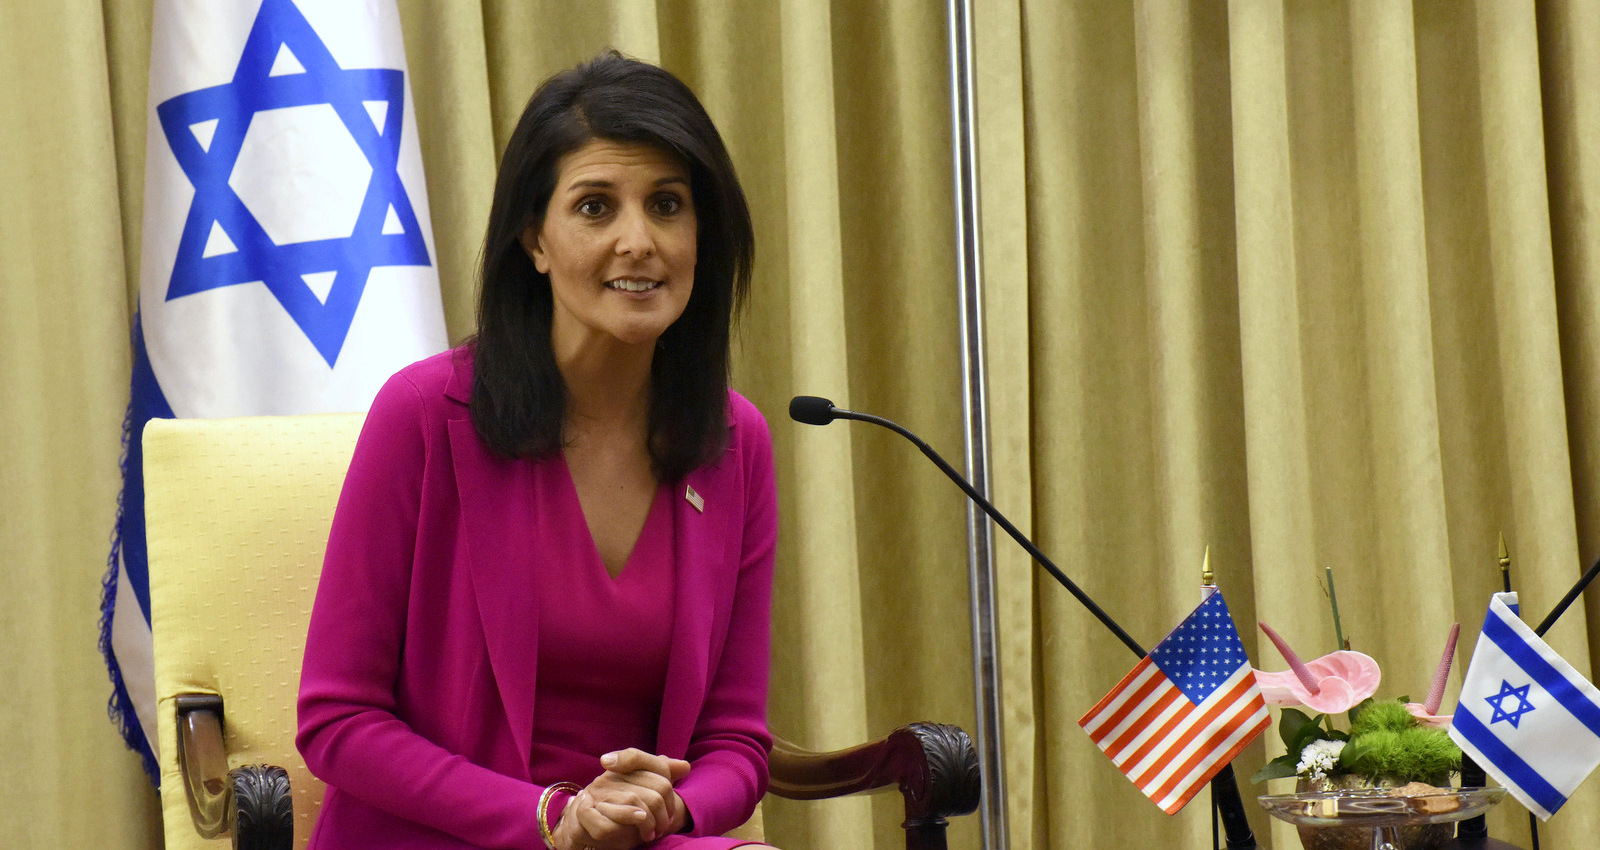 U.S. Ambassador to the United Nations Nikki Haley speaks during a meeting with Israeli President Reuven Rivlin, not seen, in his residence in Jerusalem, Israel, Wednesday, June 7, 2017. (Debbie Hill/Pool photo via AP)